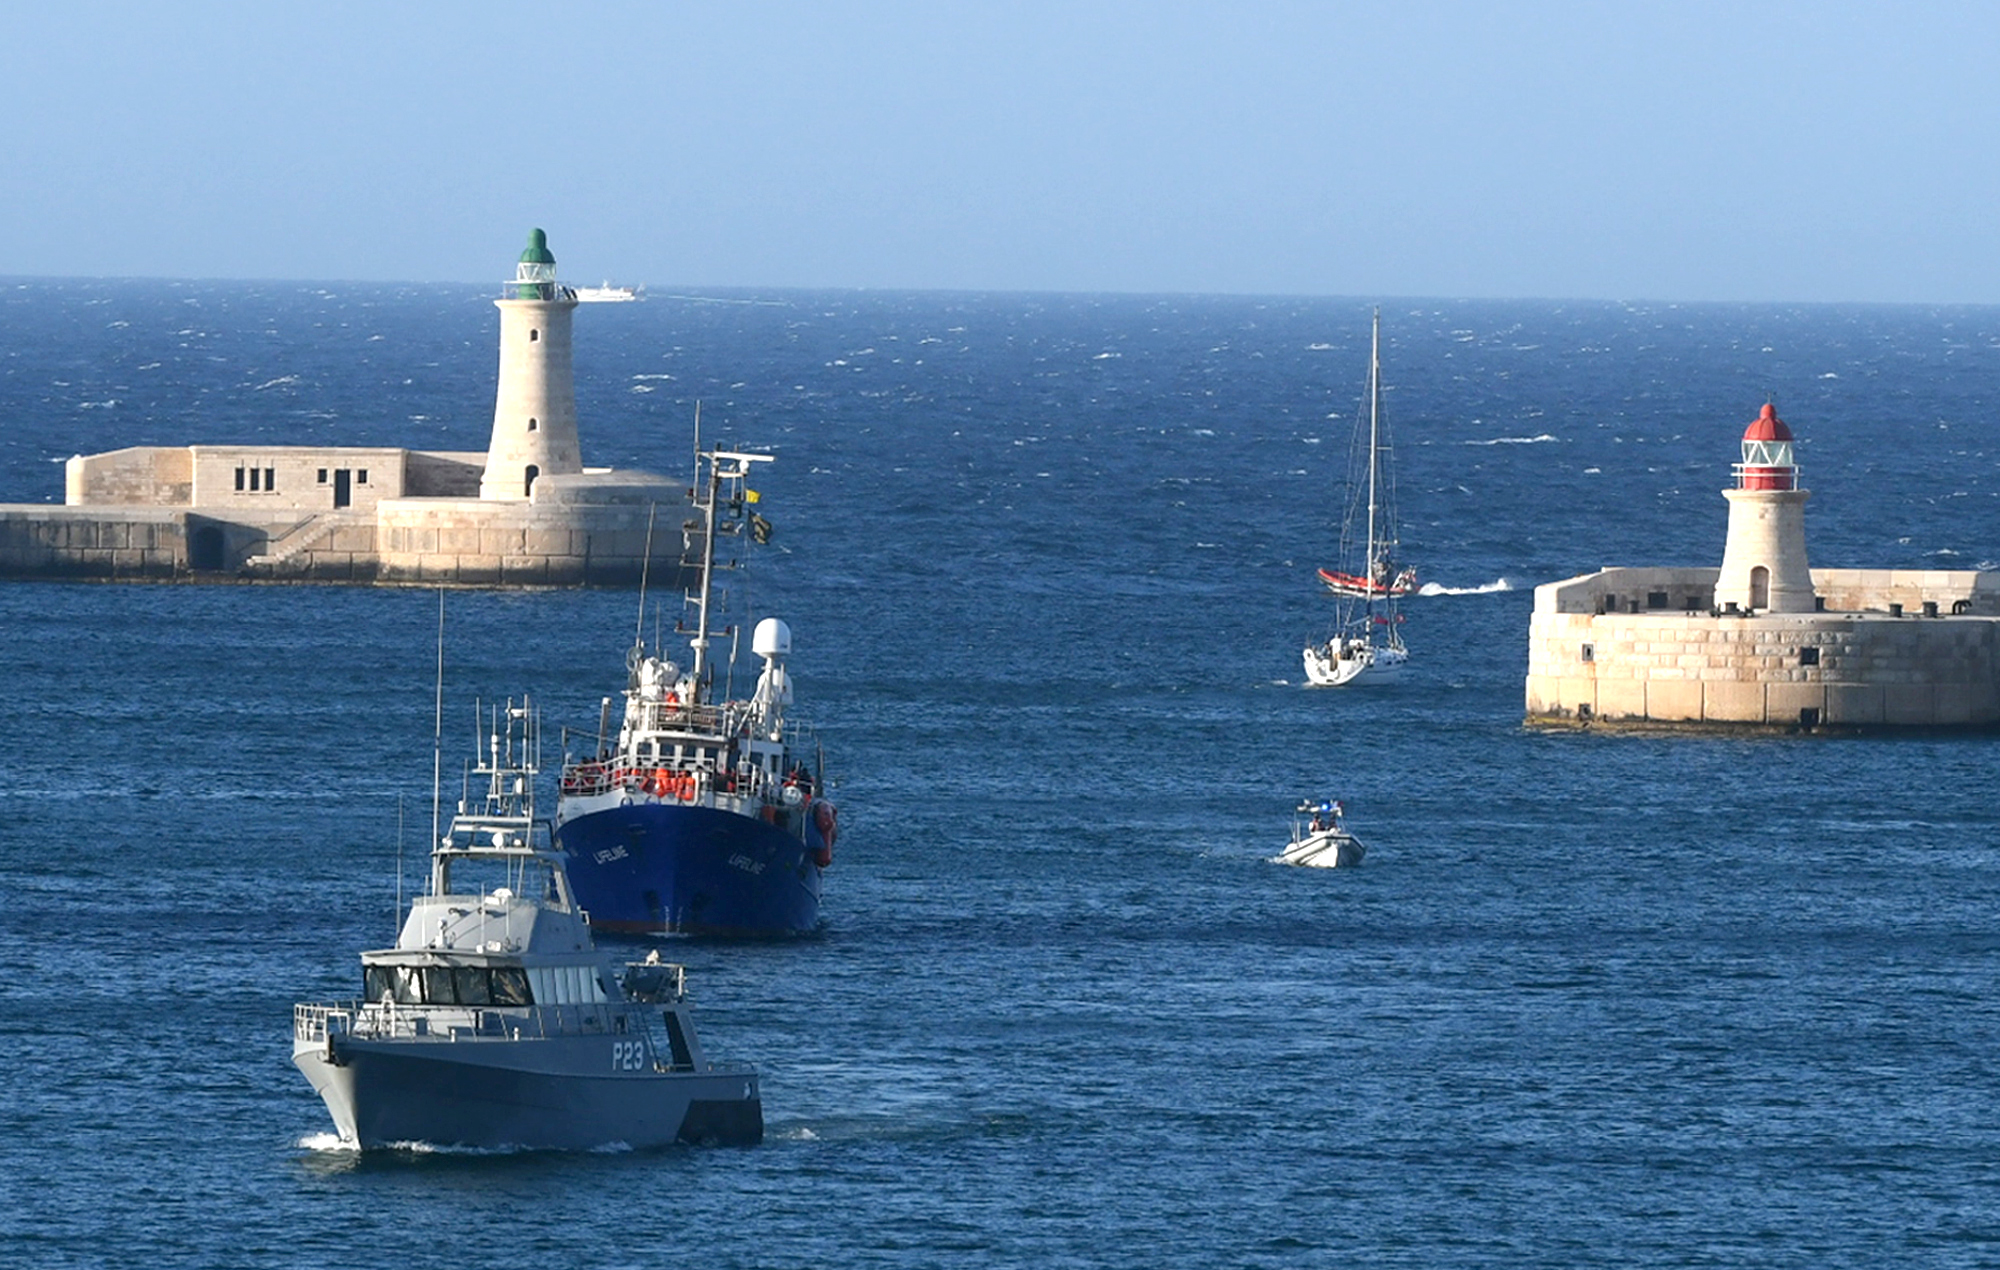 PHOTO: Escorted by a Maltese coast guard boat, the ship operated by German aid group Mission Lifeline, arrives at the Valletta port in Malta, after a journey of nearly a week while awaiting permission to make landfall, June 27, 2018.